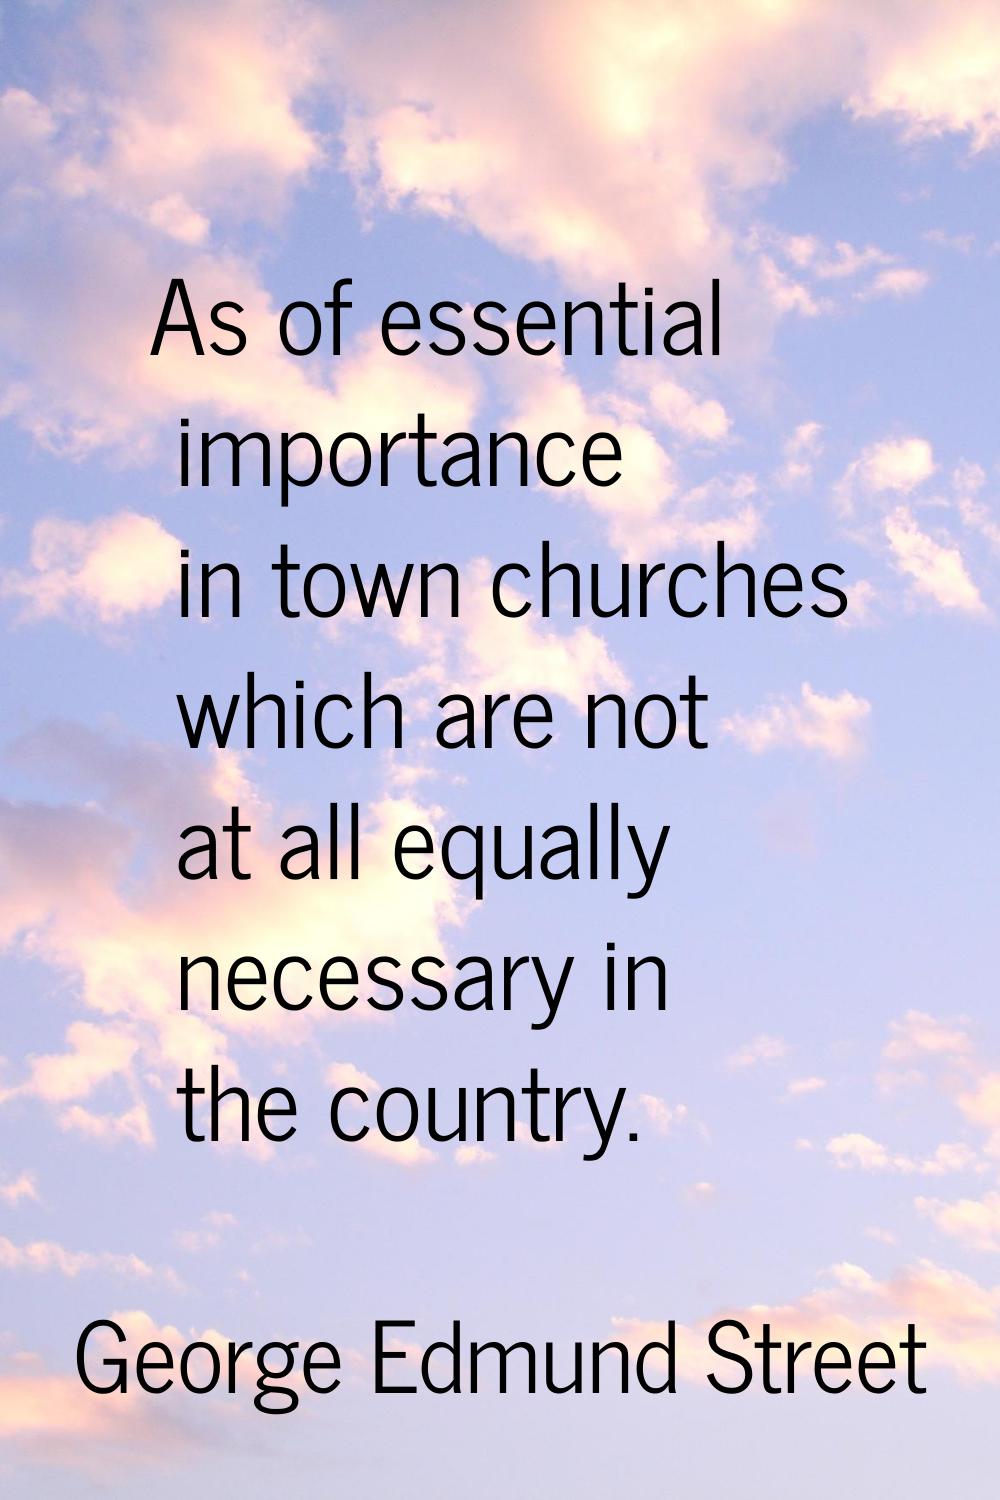 As of essential importance in town churches which are not at all equally necessary in the country.